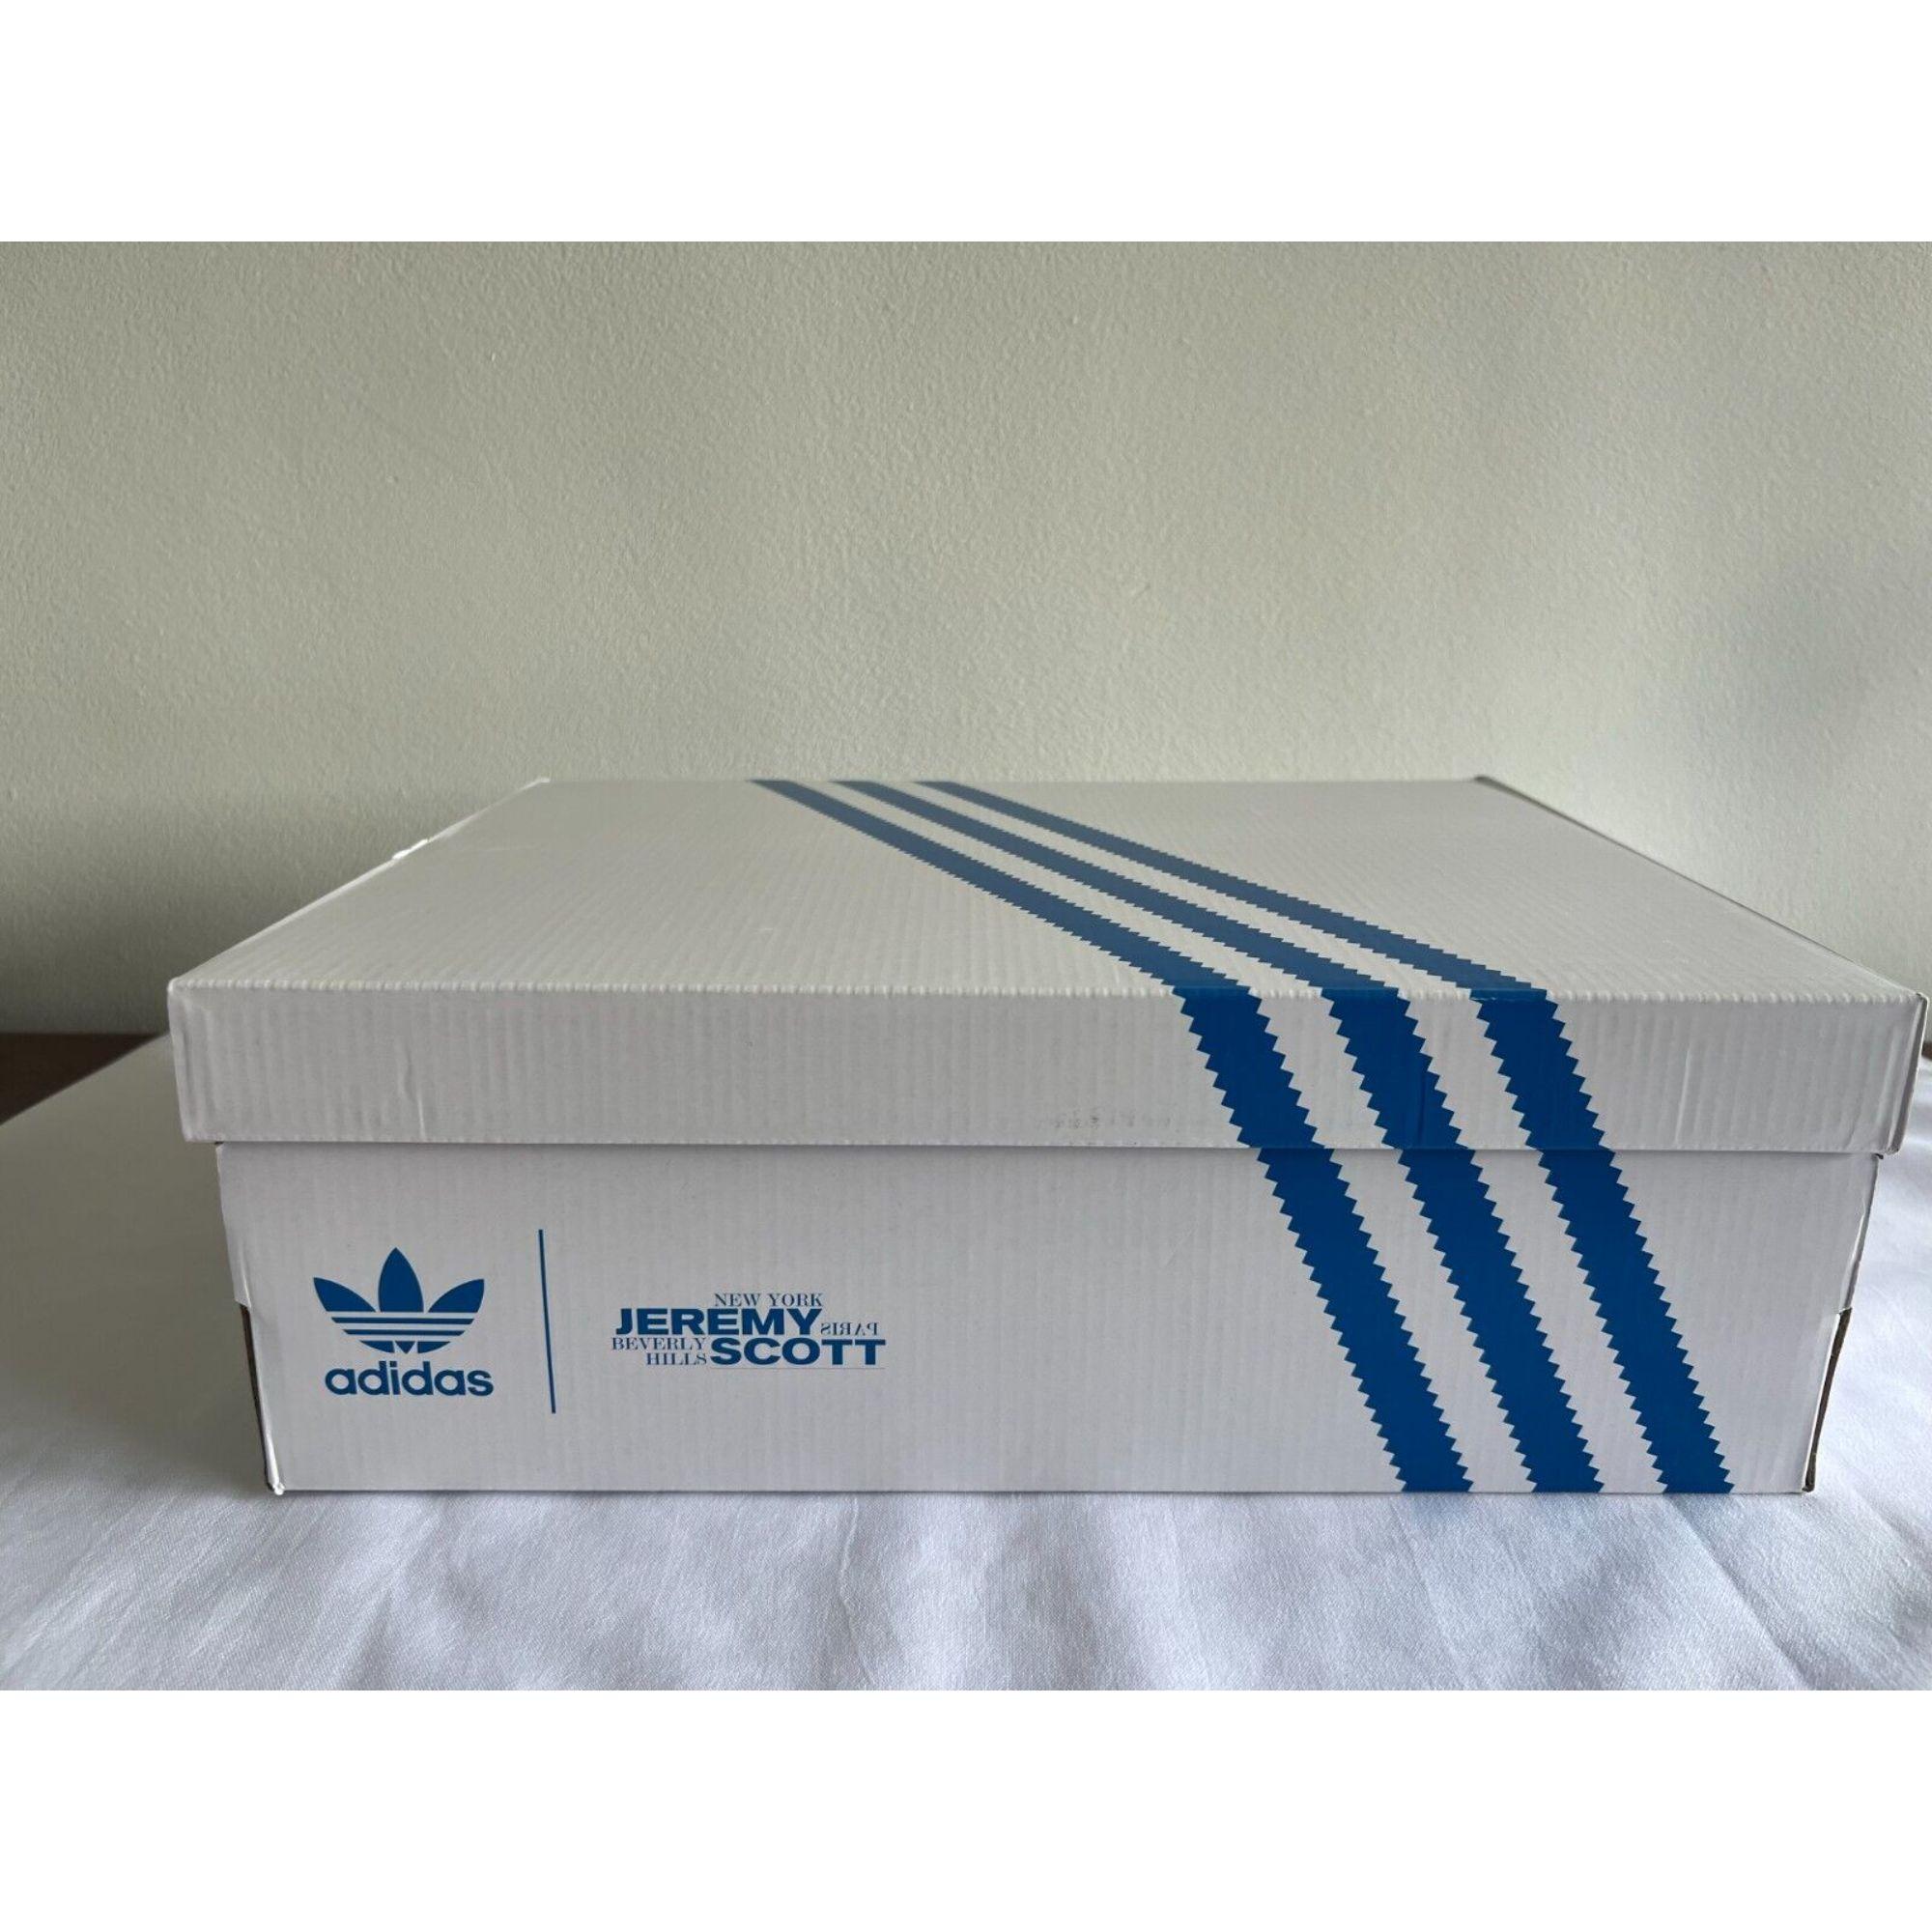 Adidas Originals ObyO Wings 4.0 Core Cloud Sneakers by Jeremy Scott, Size 13 For Sale 4